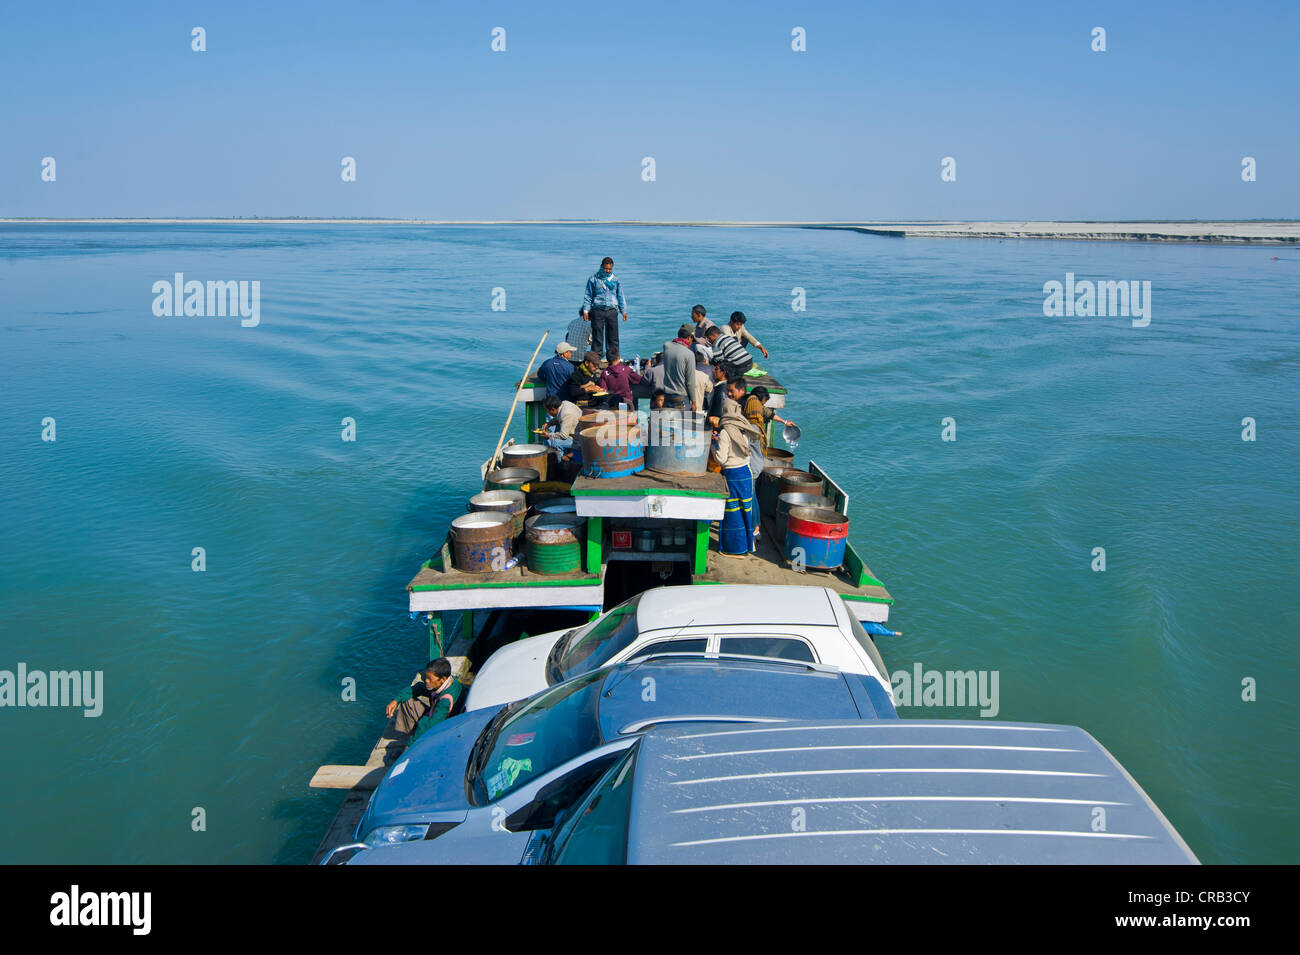 Ferry loaded with people and cars, on the Brahmaputra River, Assam, North East India, India, Asia Stock Photo